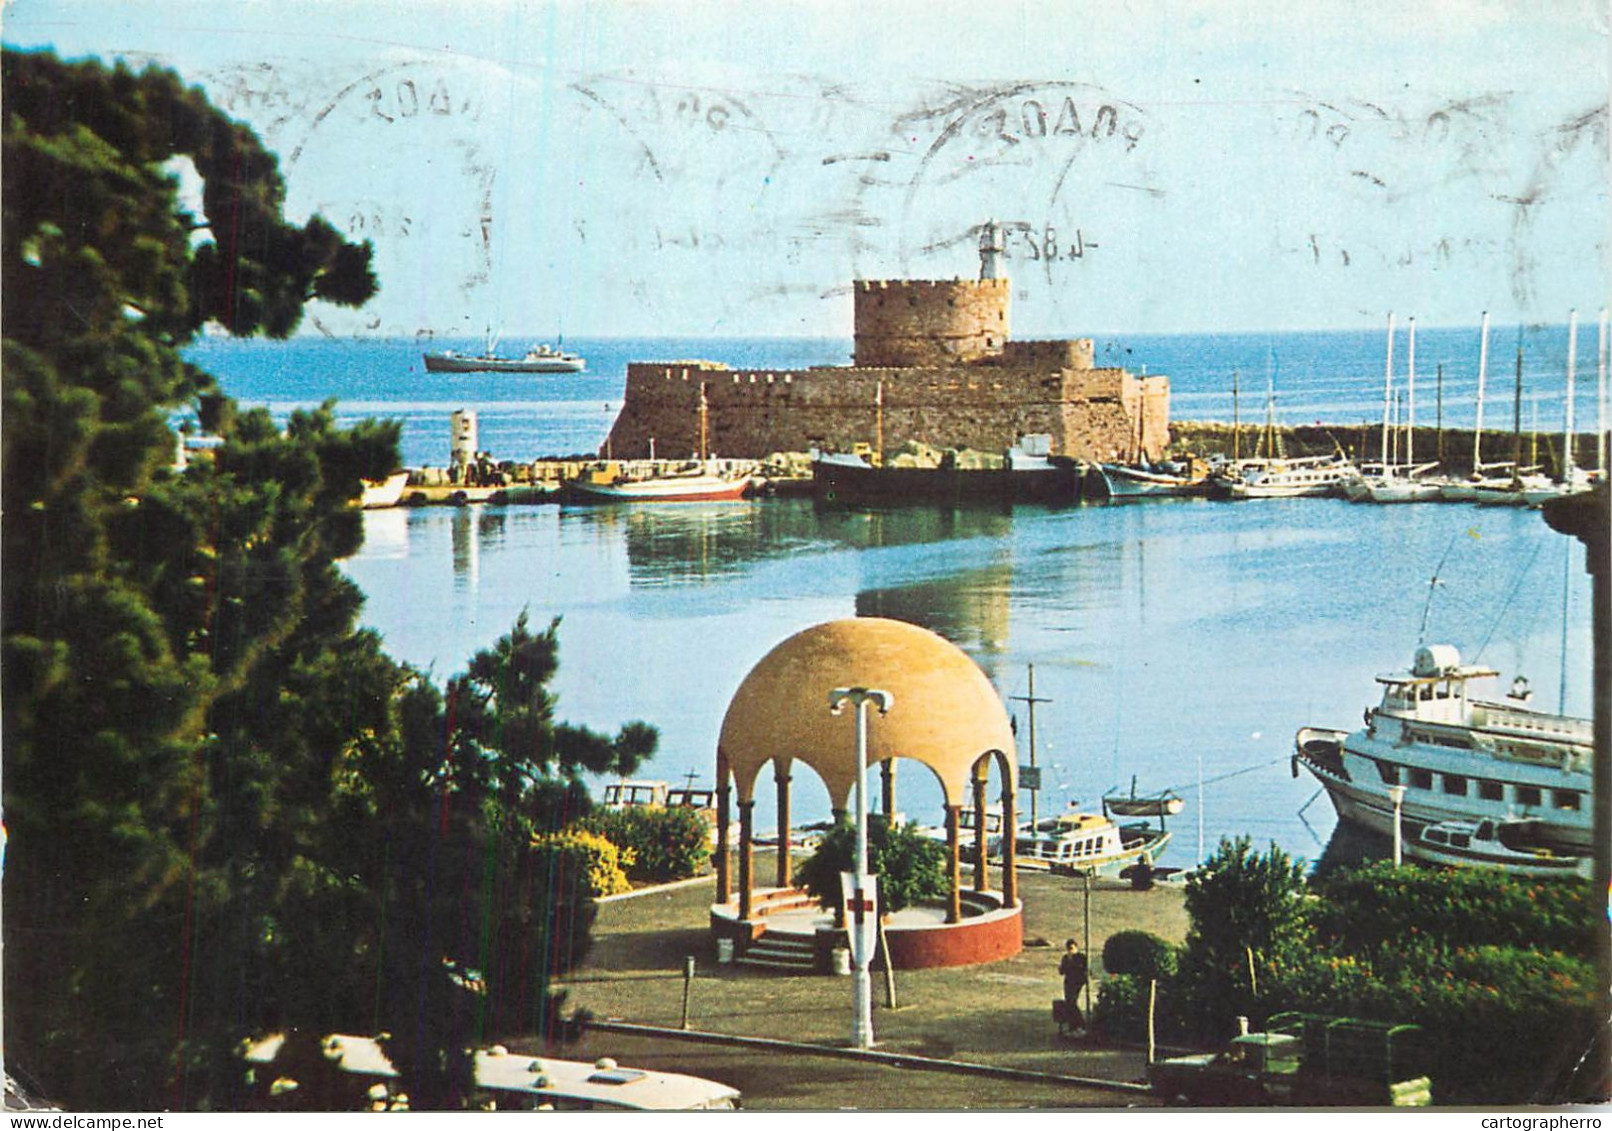 Navigation Sailing Vessels & Boats Themed Postcard Rhodos Harbourpartial View - Sailing Vessels